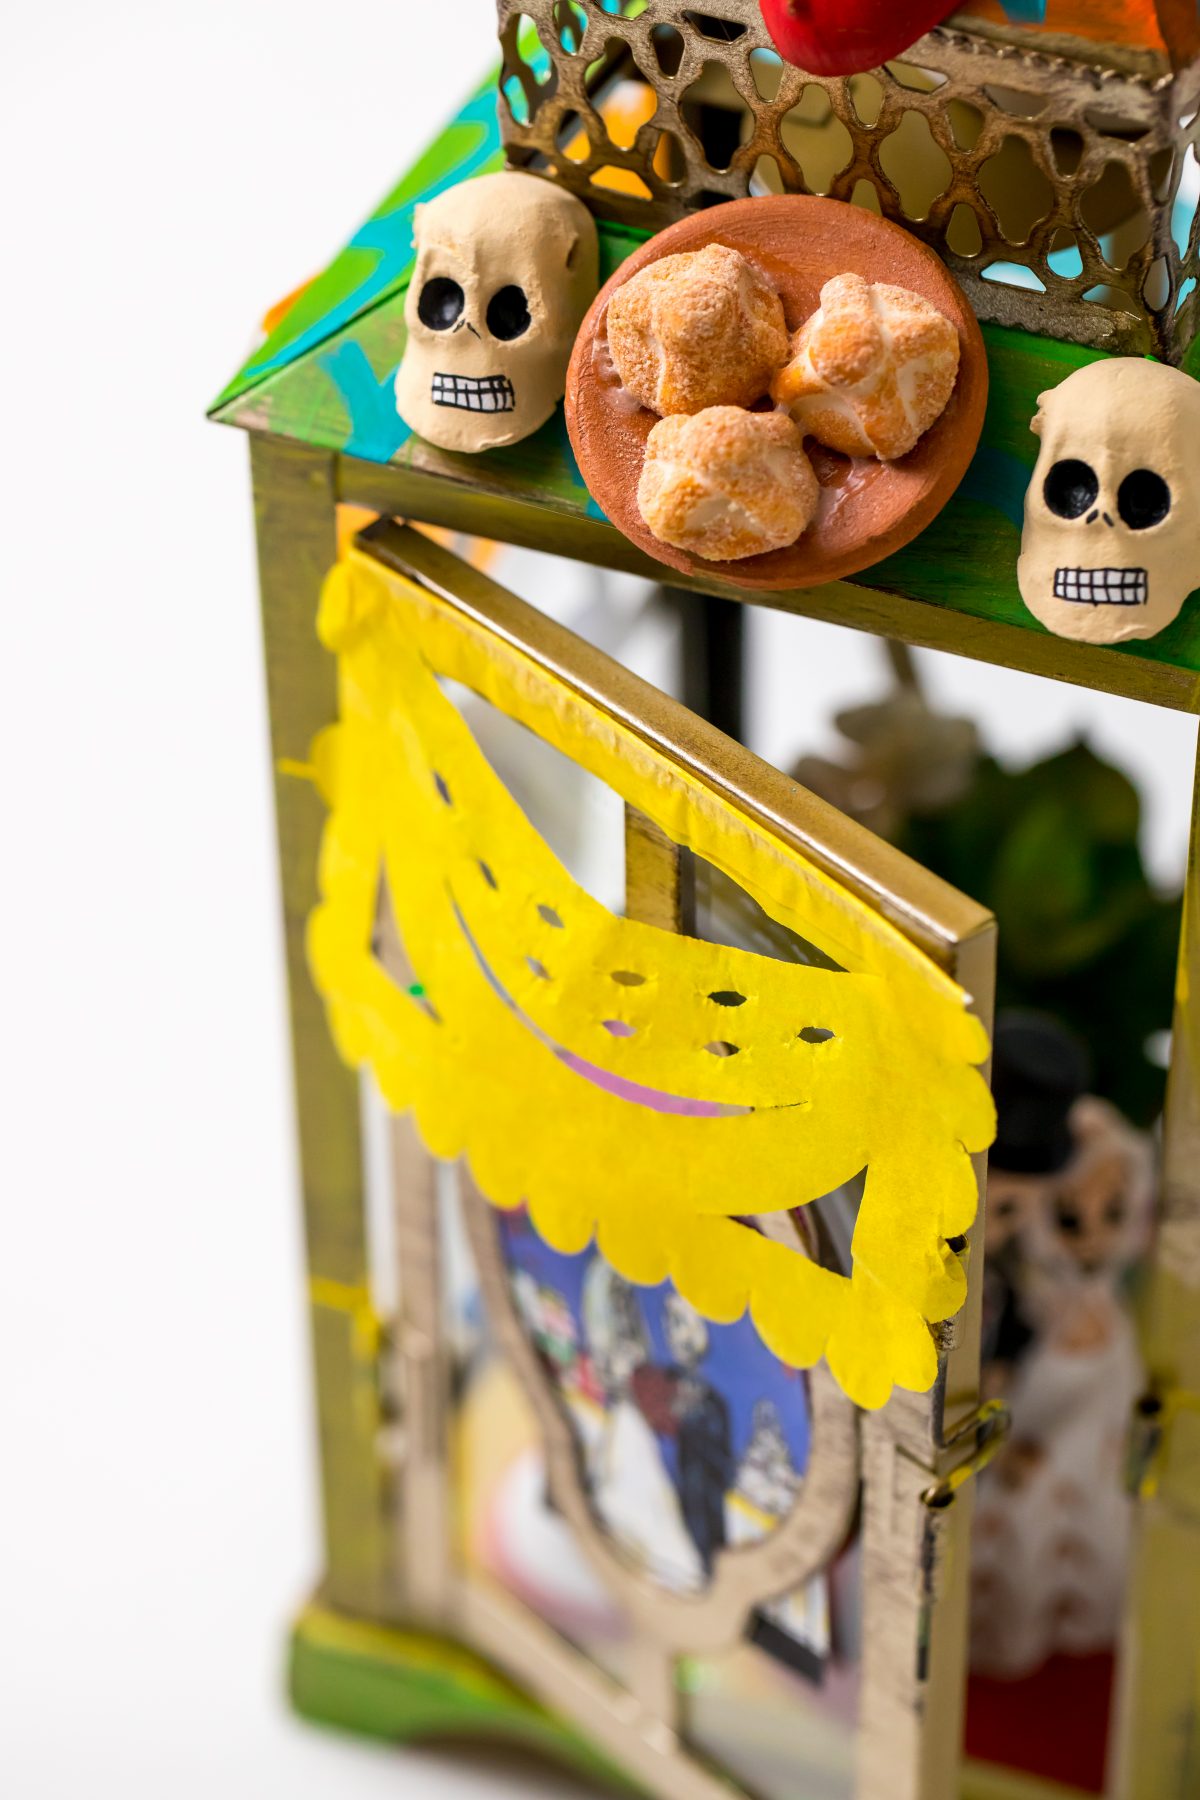 5D4B6385 - Crafty Chica - Day of the dead Shrine, with intricate detail in the embellishments